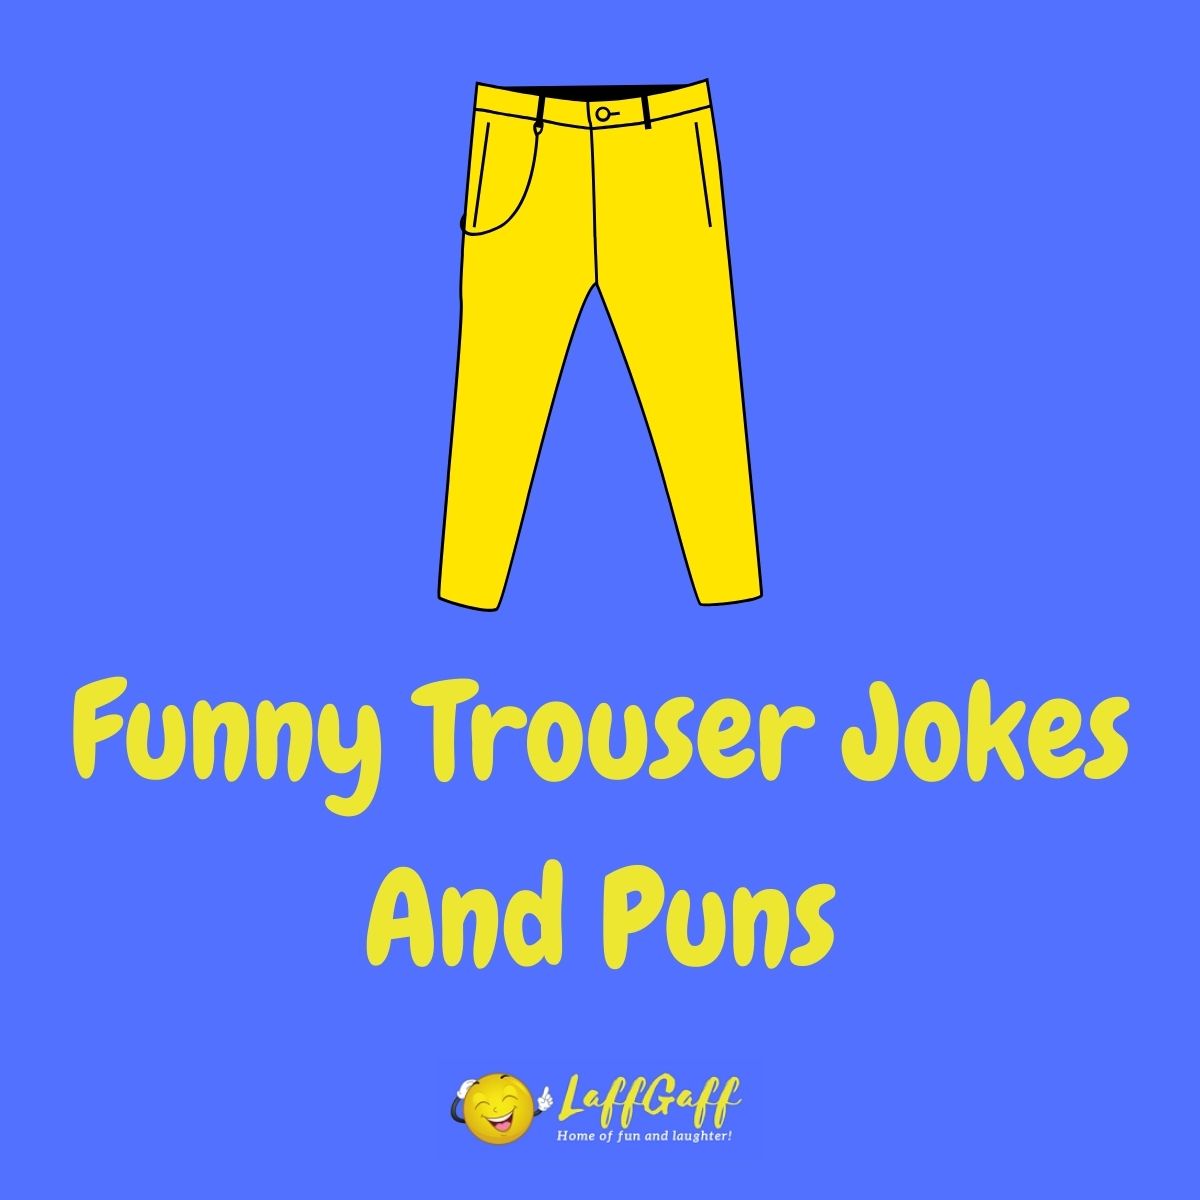 Featured image for a page of funny trouser jokes and puns.